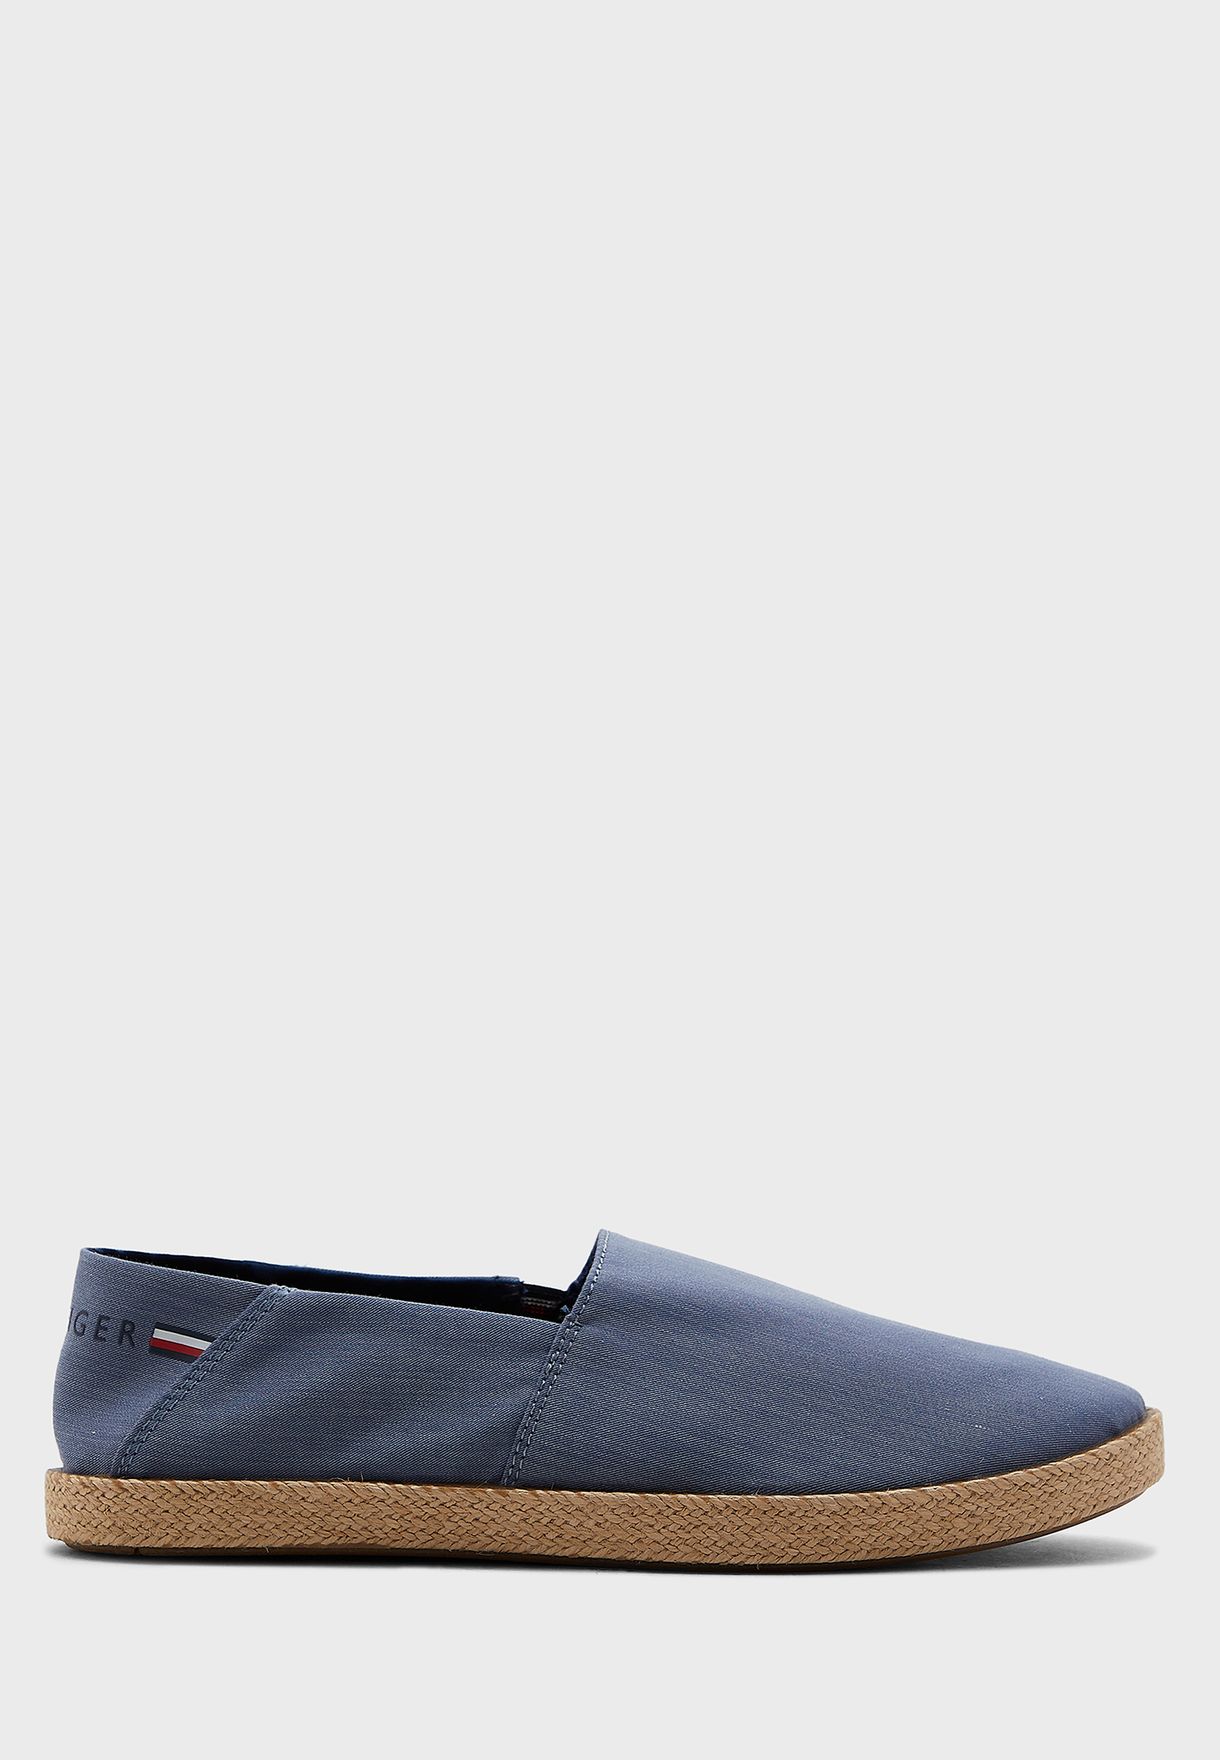 Chambray Slip On Casual Slip Ons